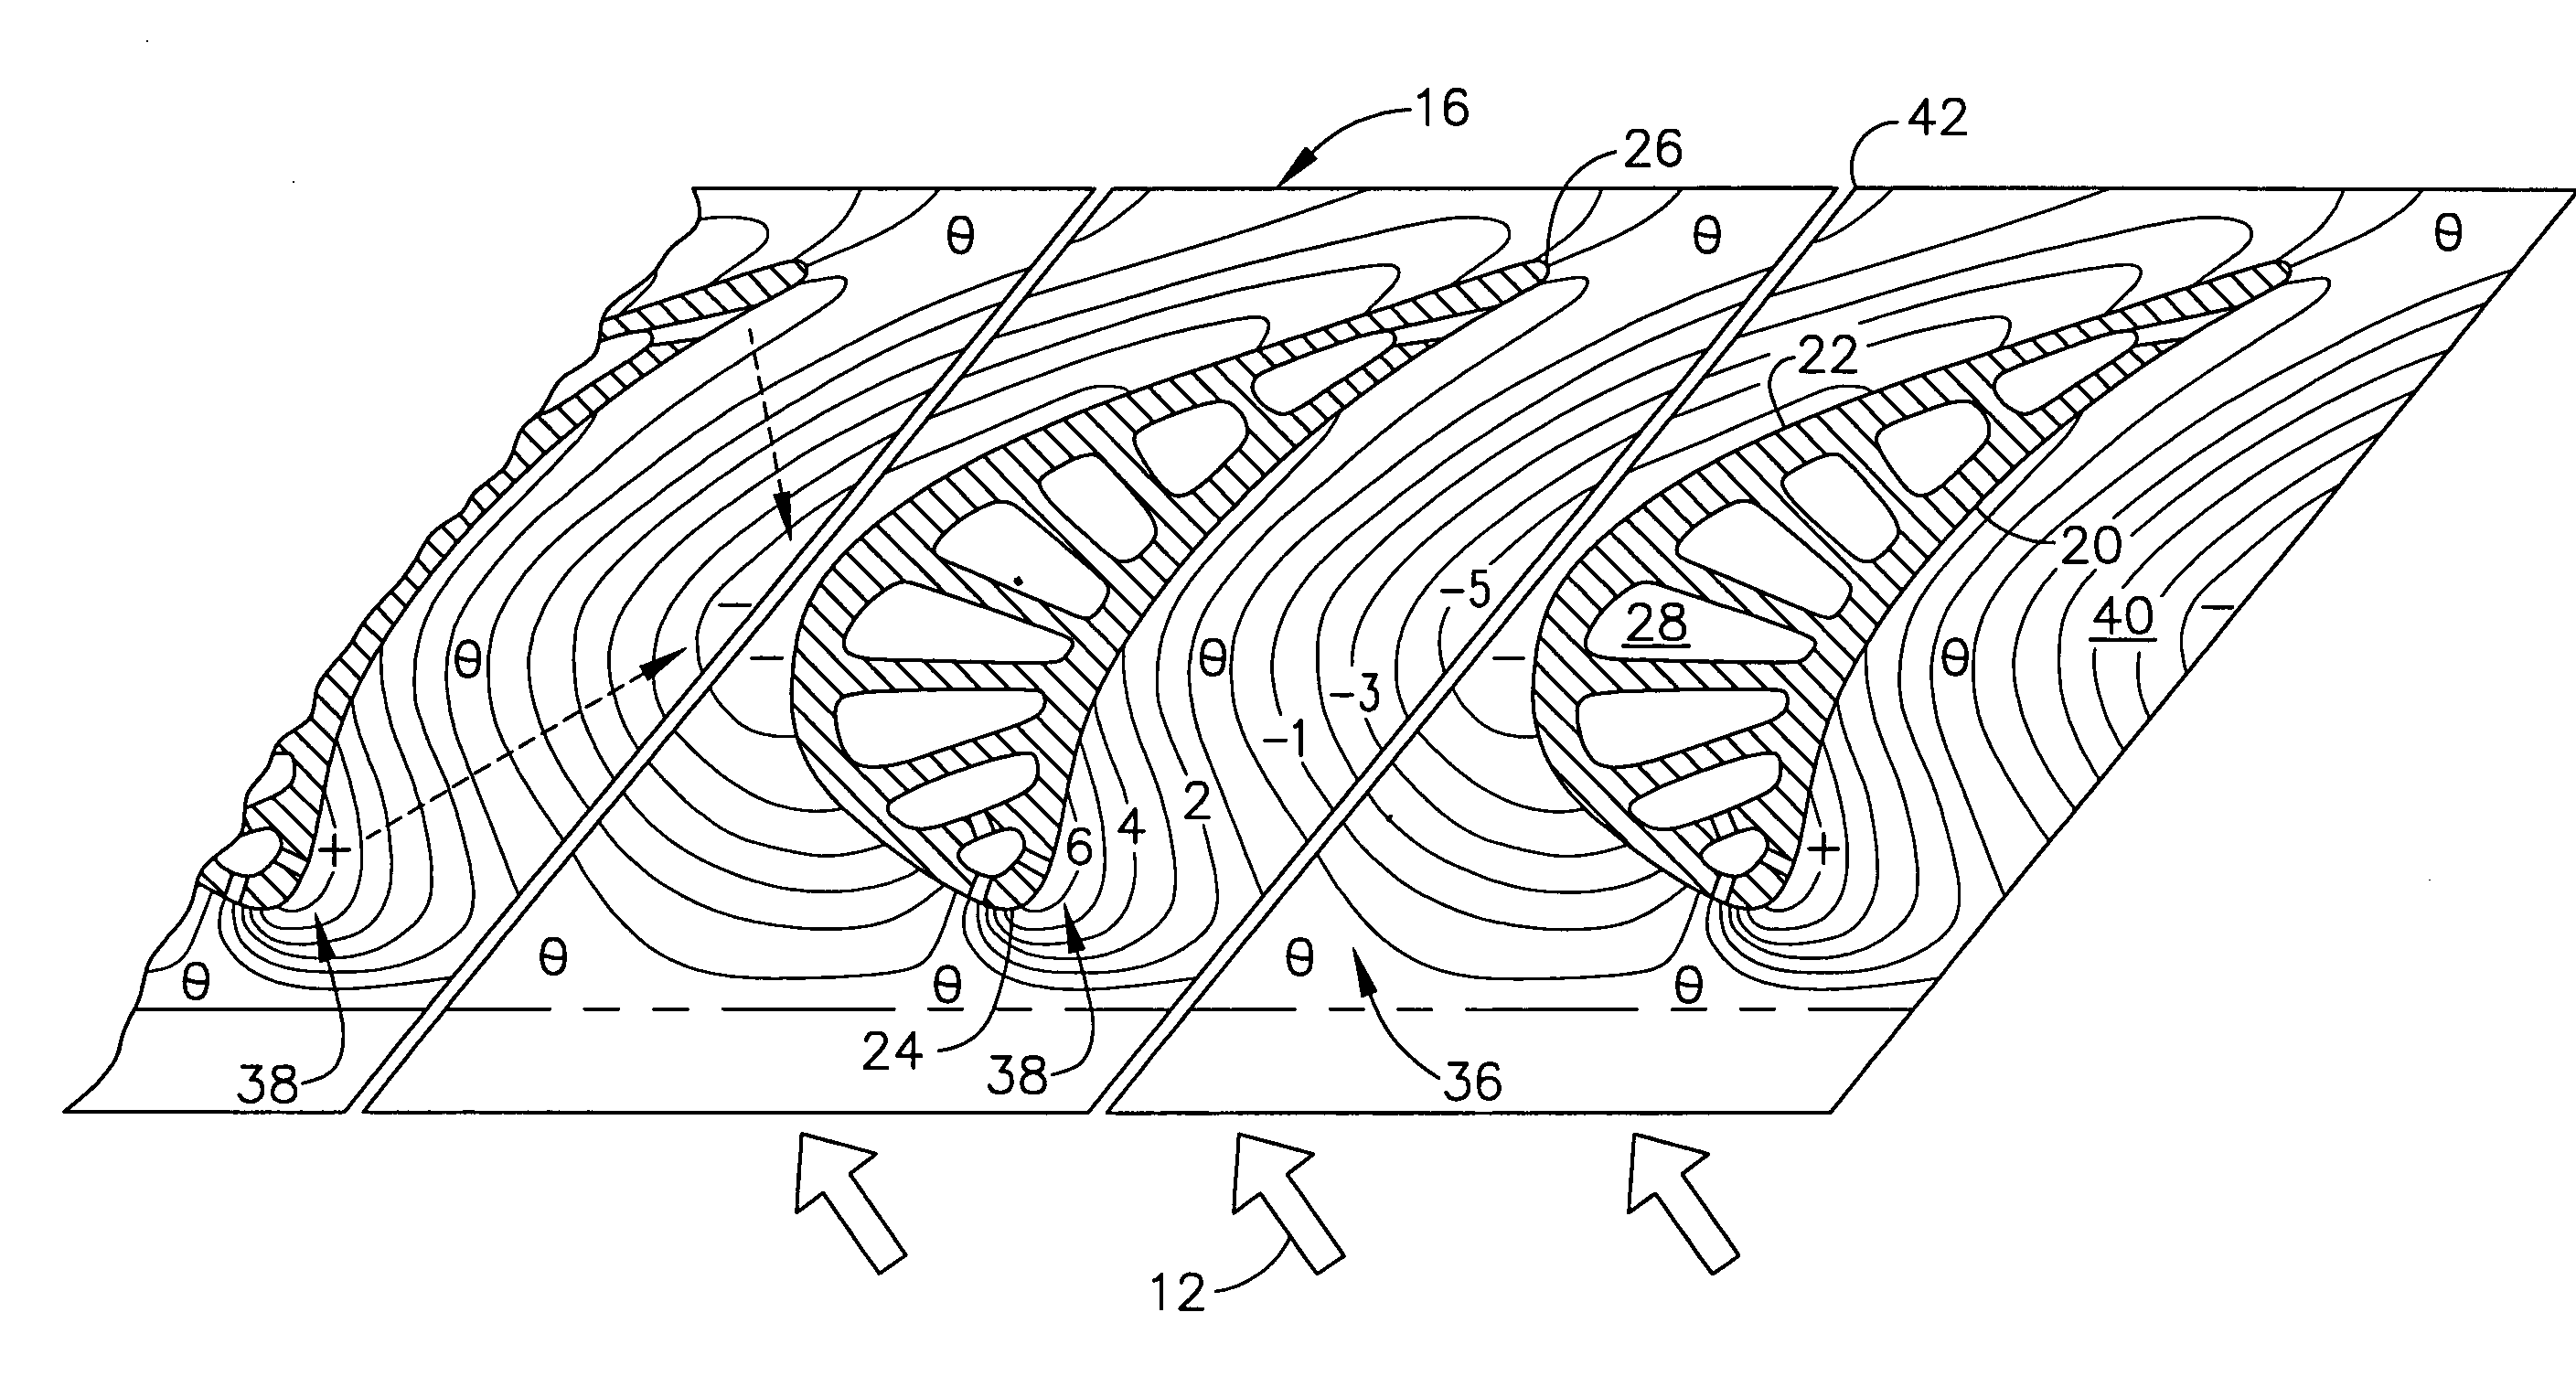 Scalloped surface turbine stage